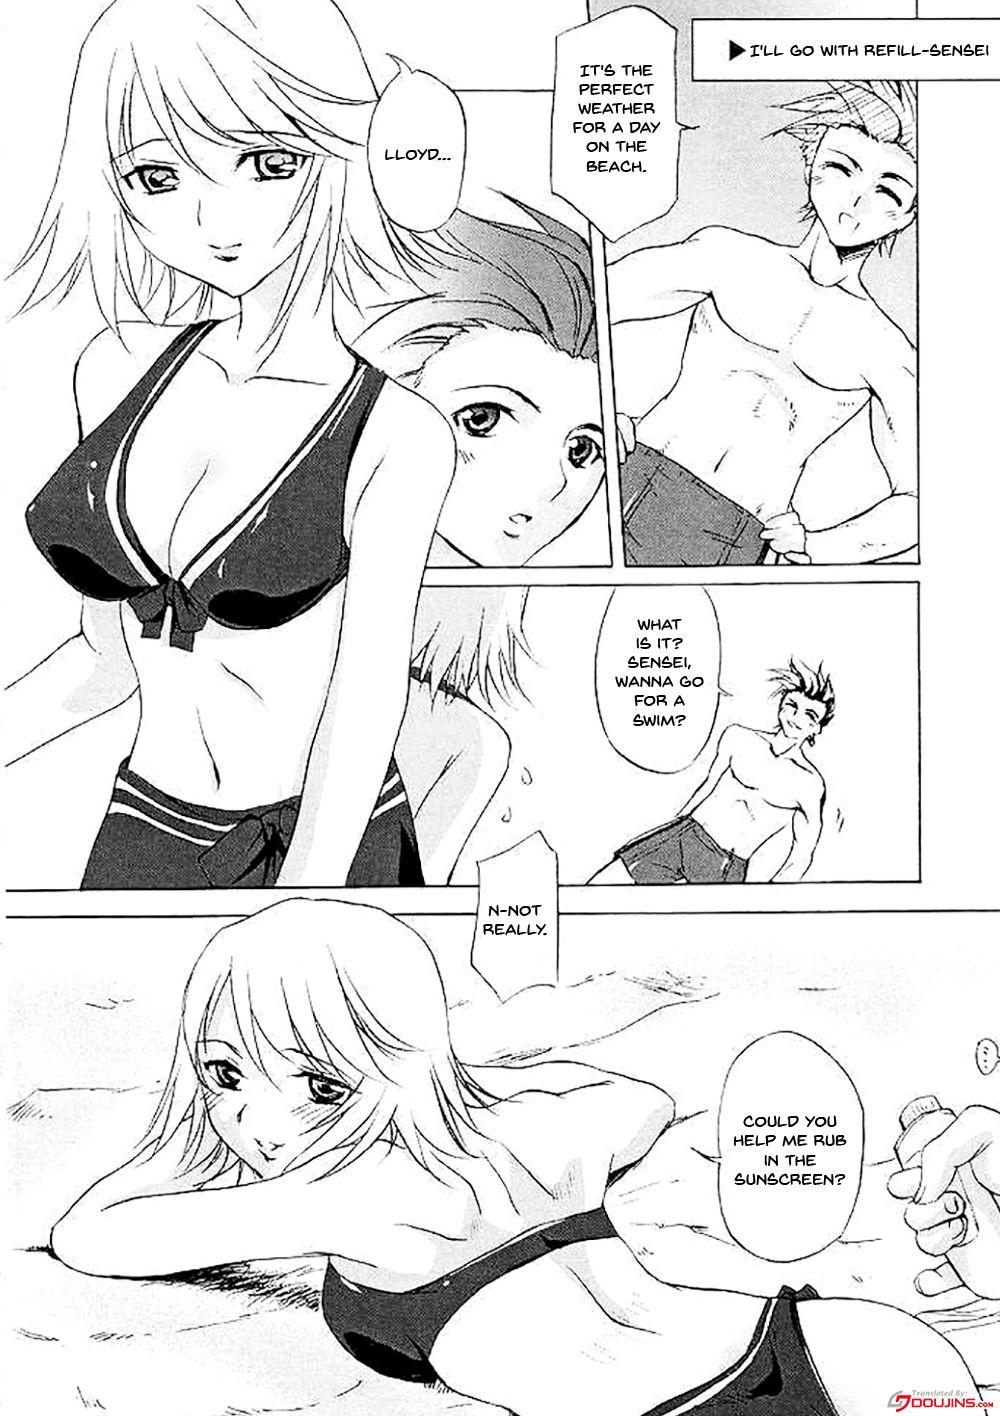 Boy Fuck Girl Tales of Seaside - Tales of symphonia Tamil - Page 3